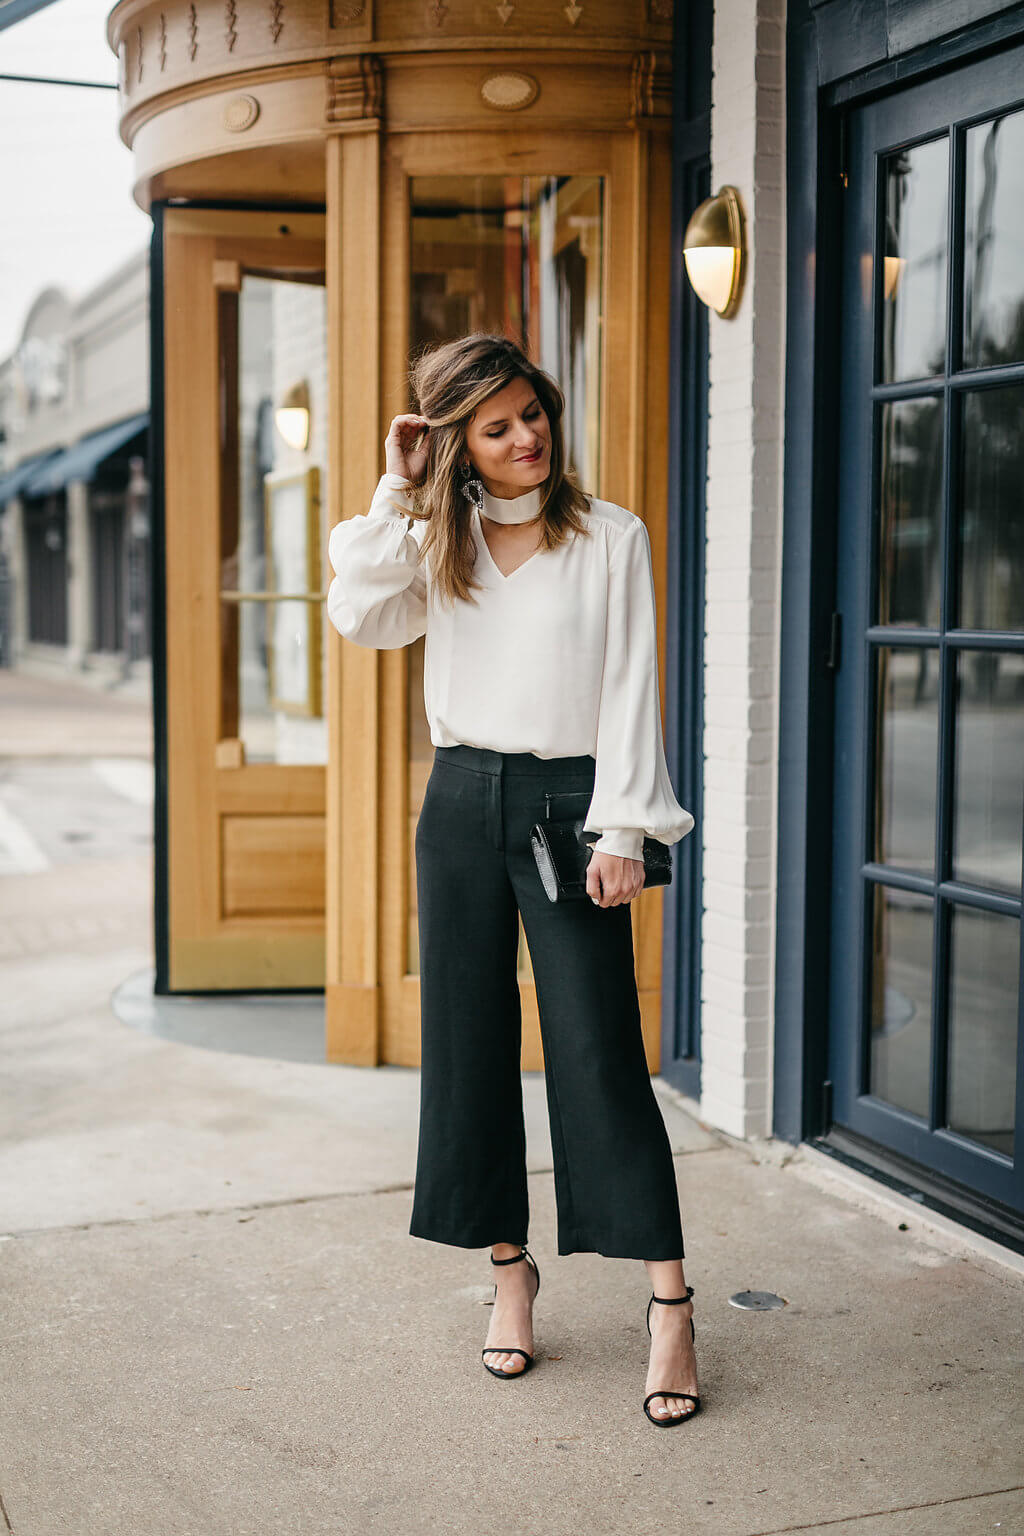 vince camuto white blouse, black cropped pants, strappy heels